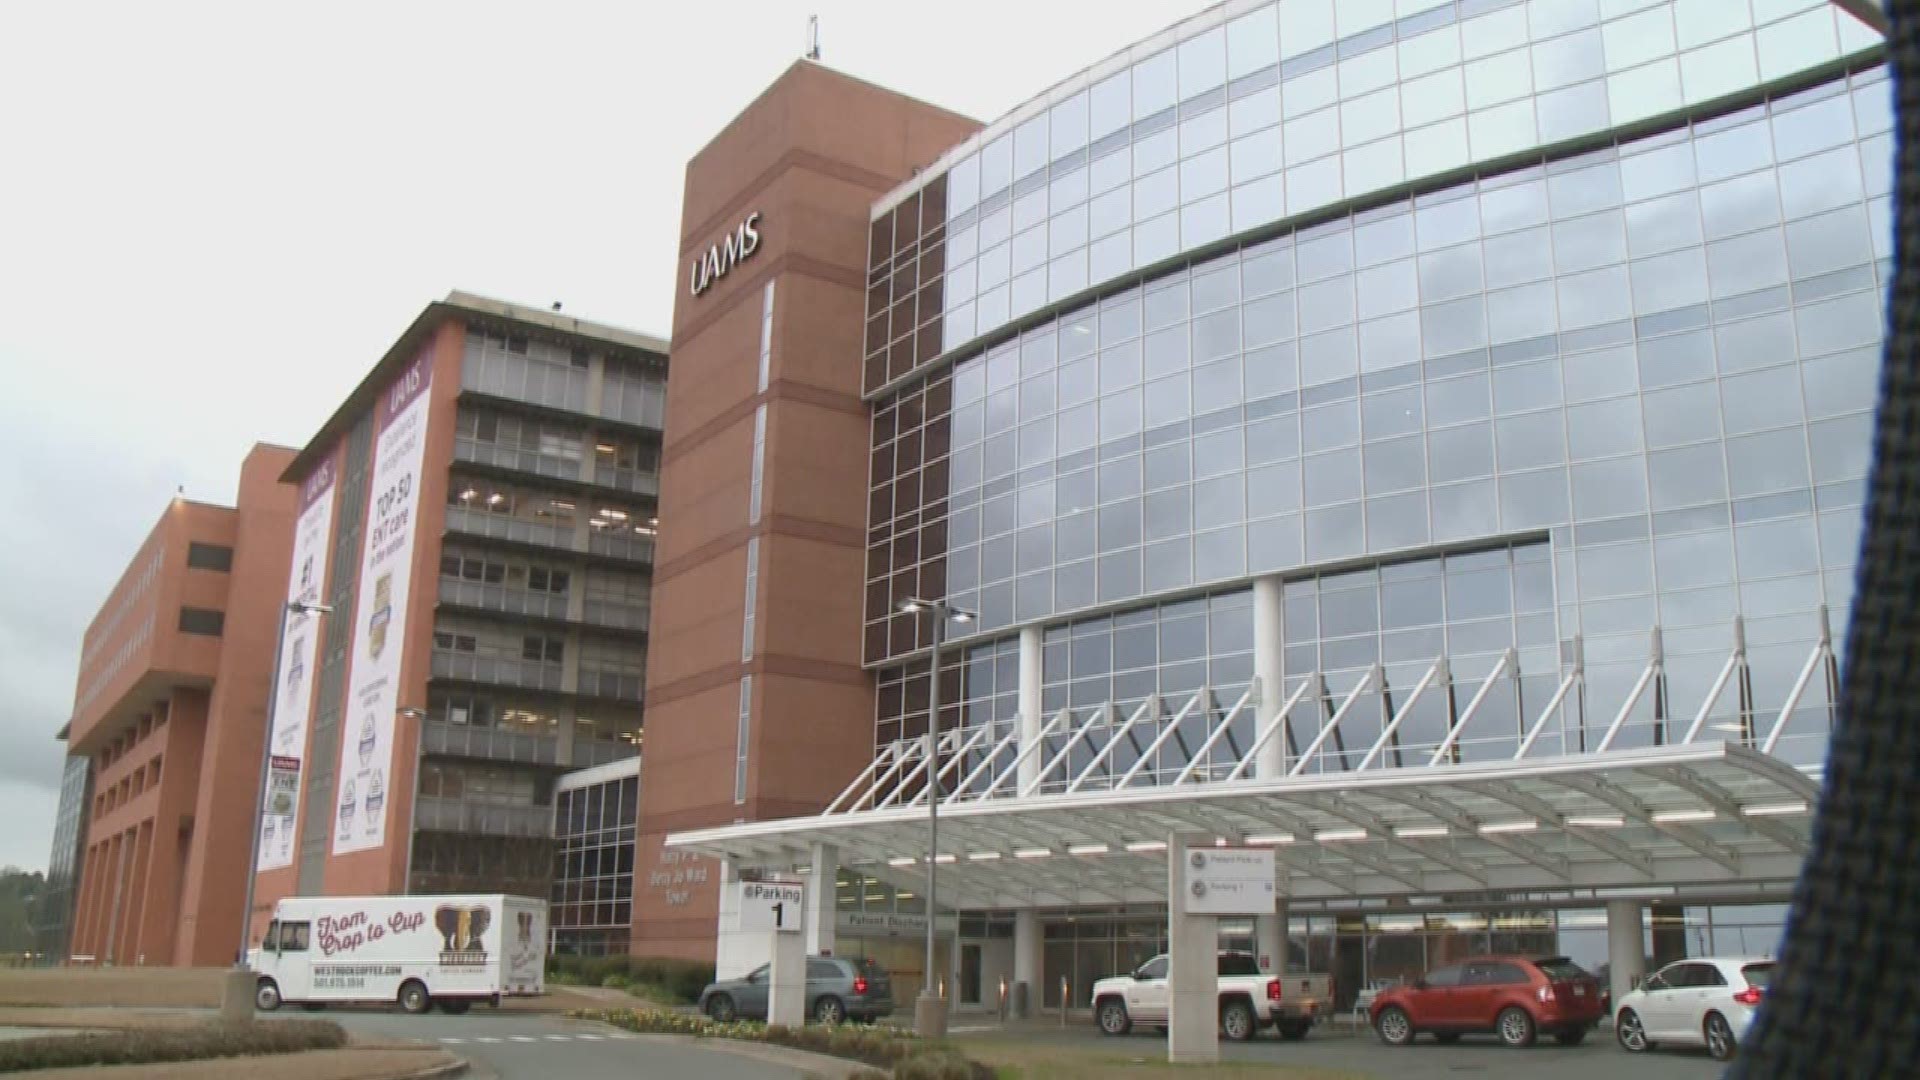 UAMS is getting $2.3 million from the Arkansas Department of Human Services to help them better assist patients battling opioid addiction.